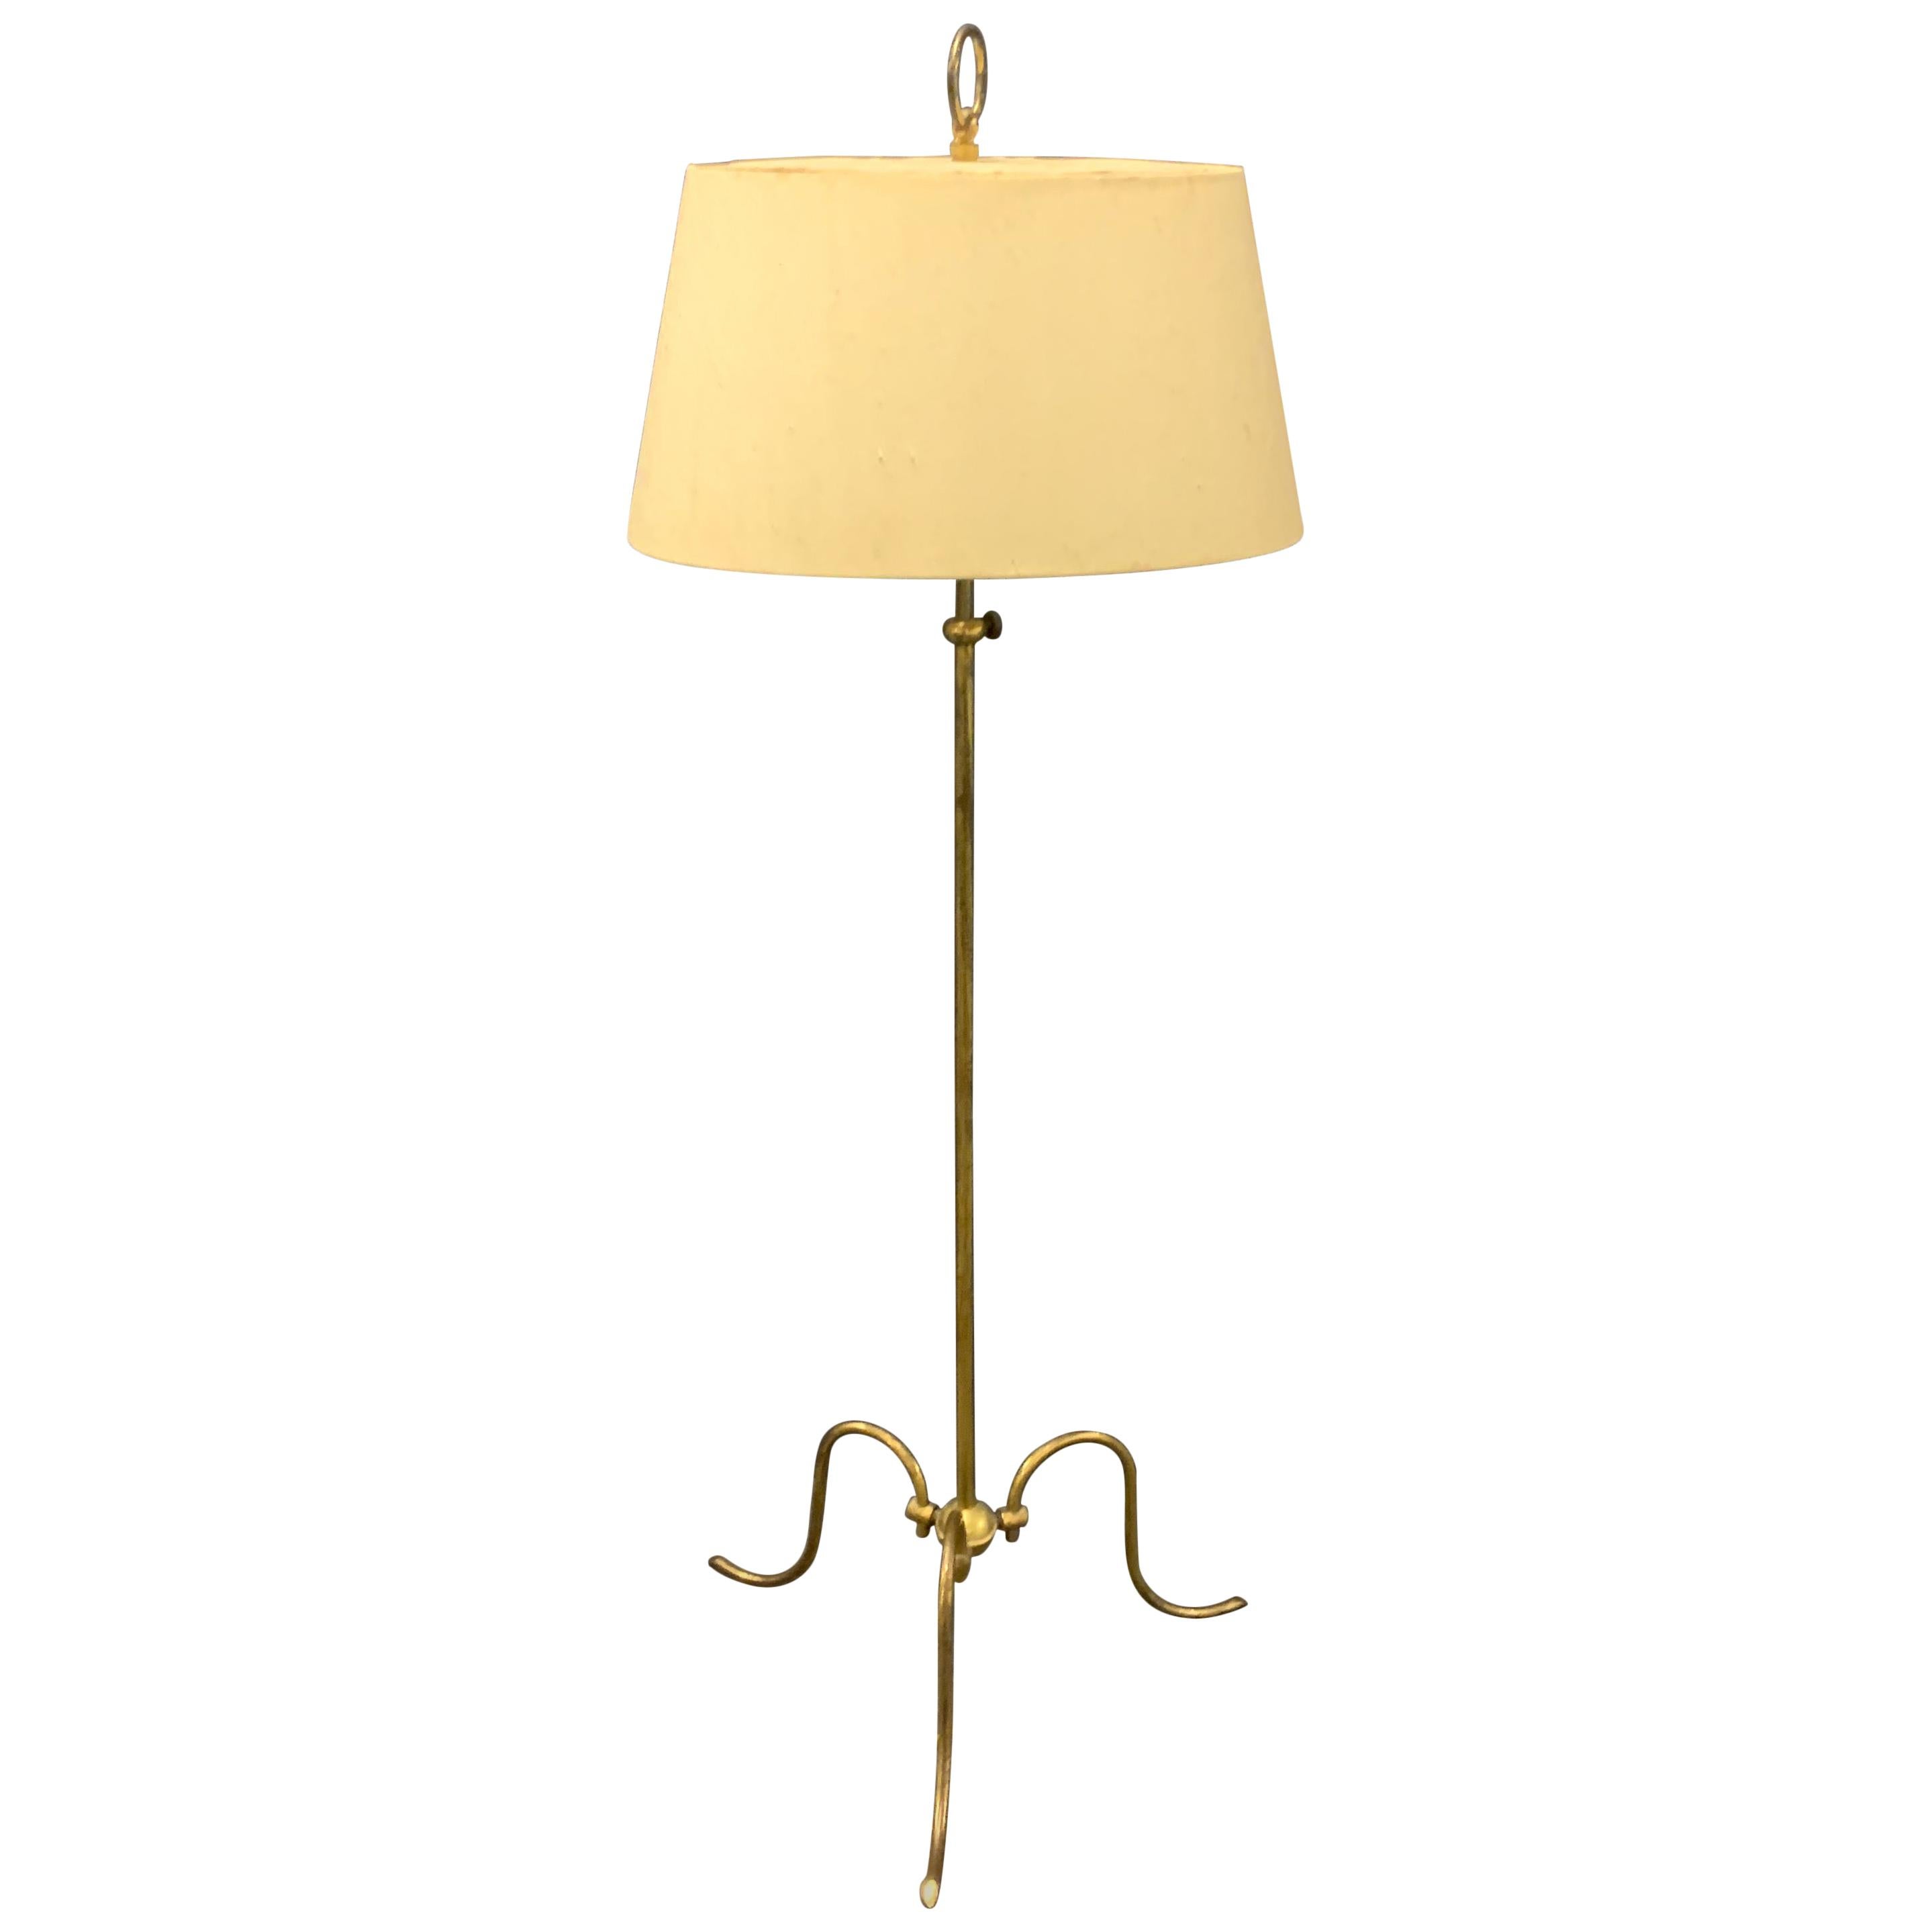 Wonderful High Adjustable Reading and Floor Lamp For Sale